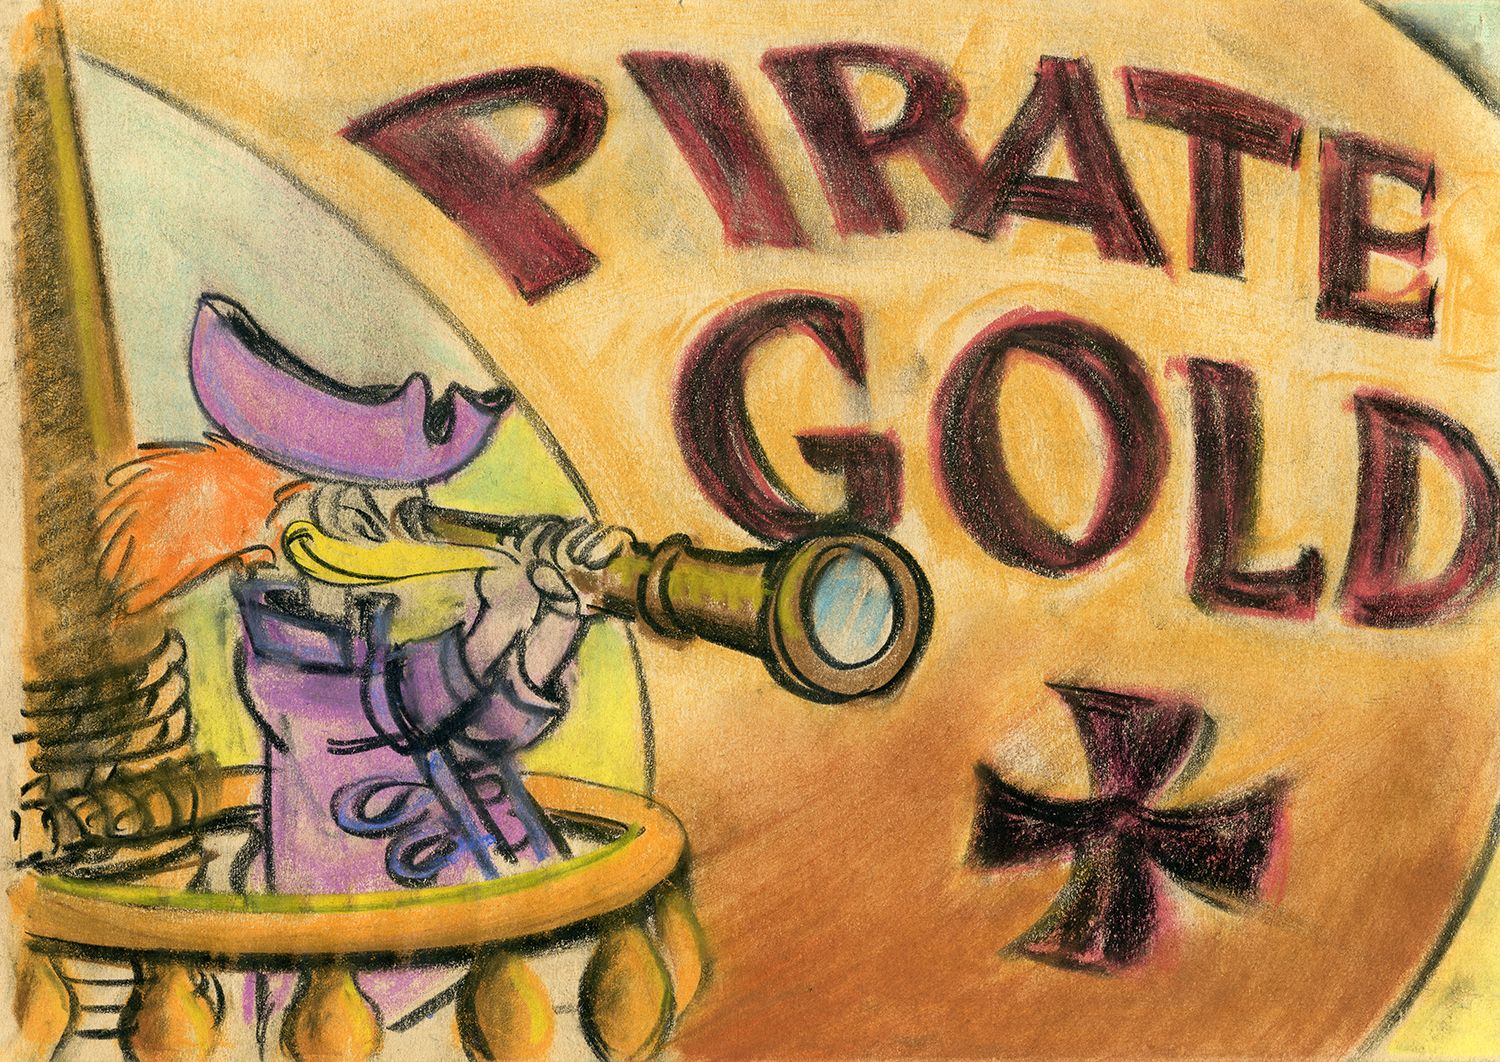 Art from unproduced Disney animated short Pirate Gold.